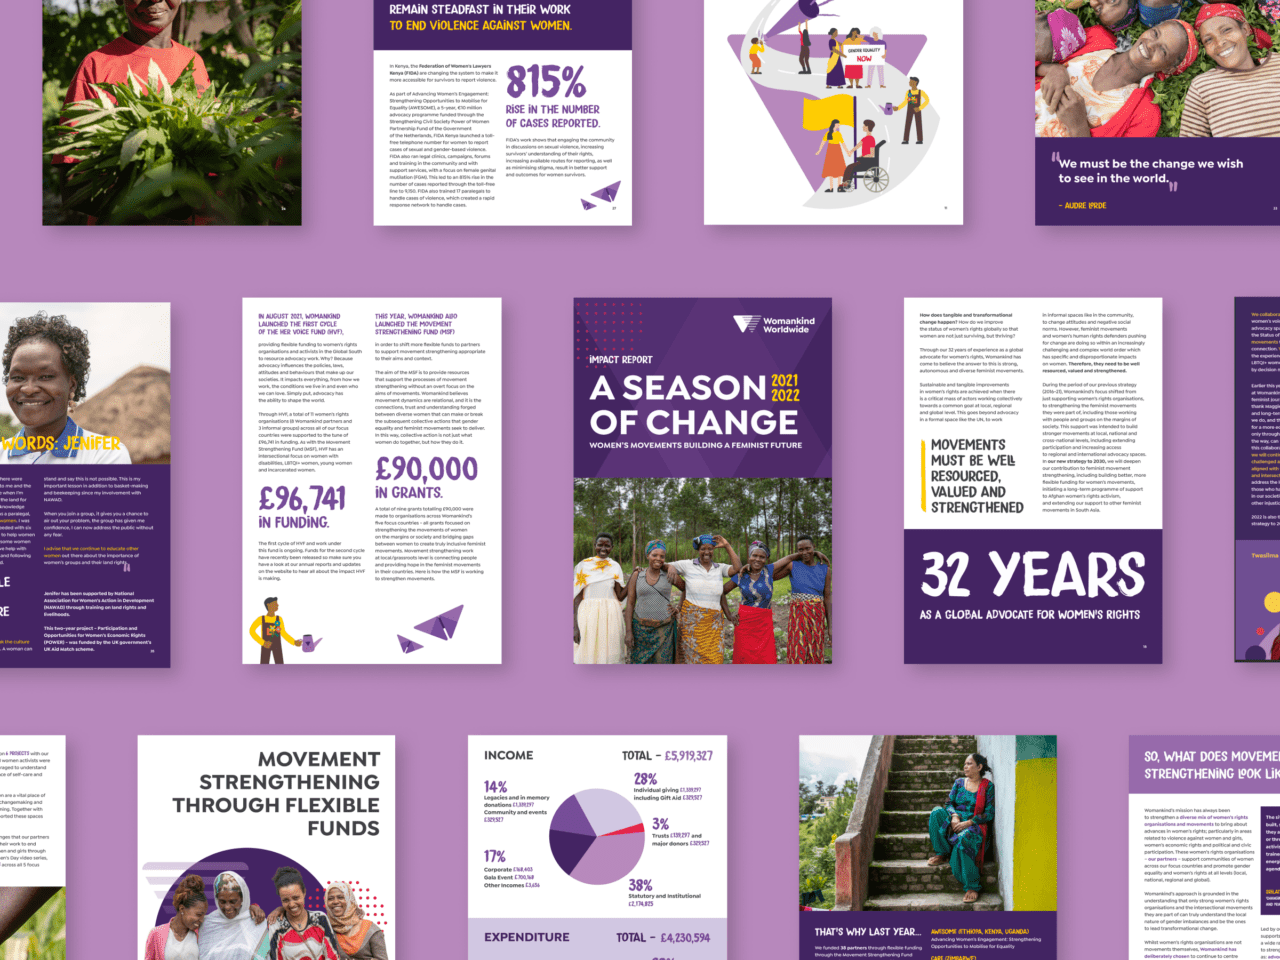 A purple background features pages from the Womankind Worldwide website.